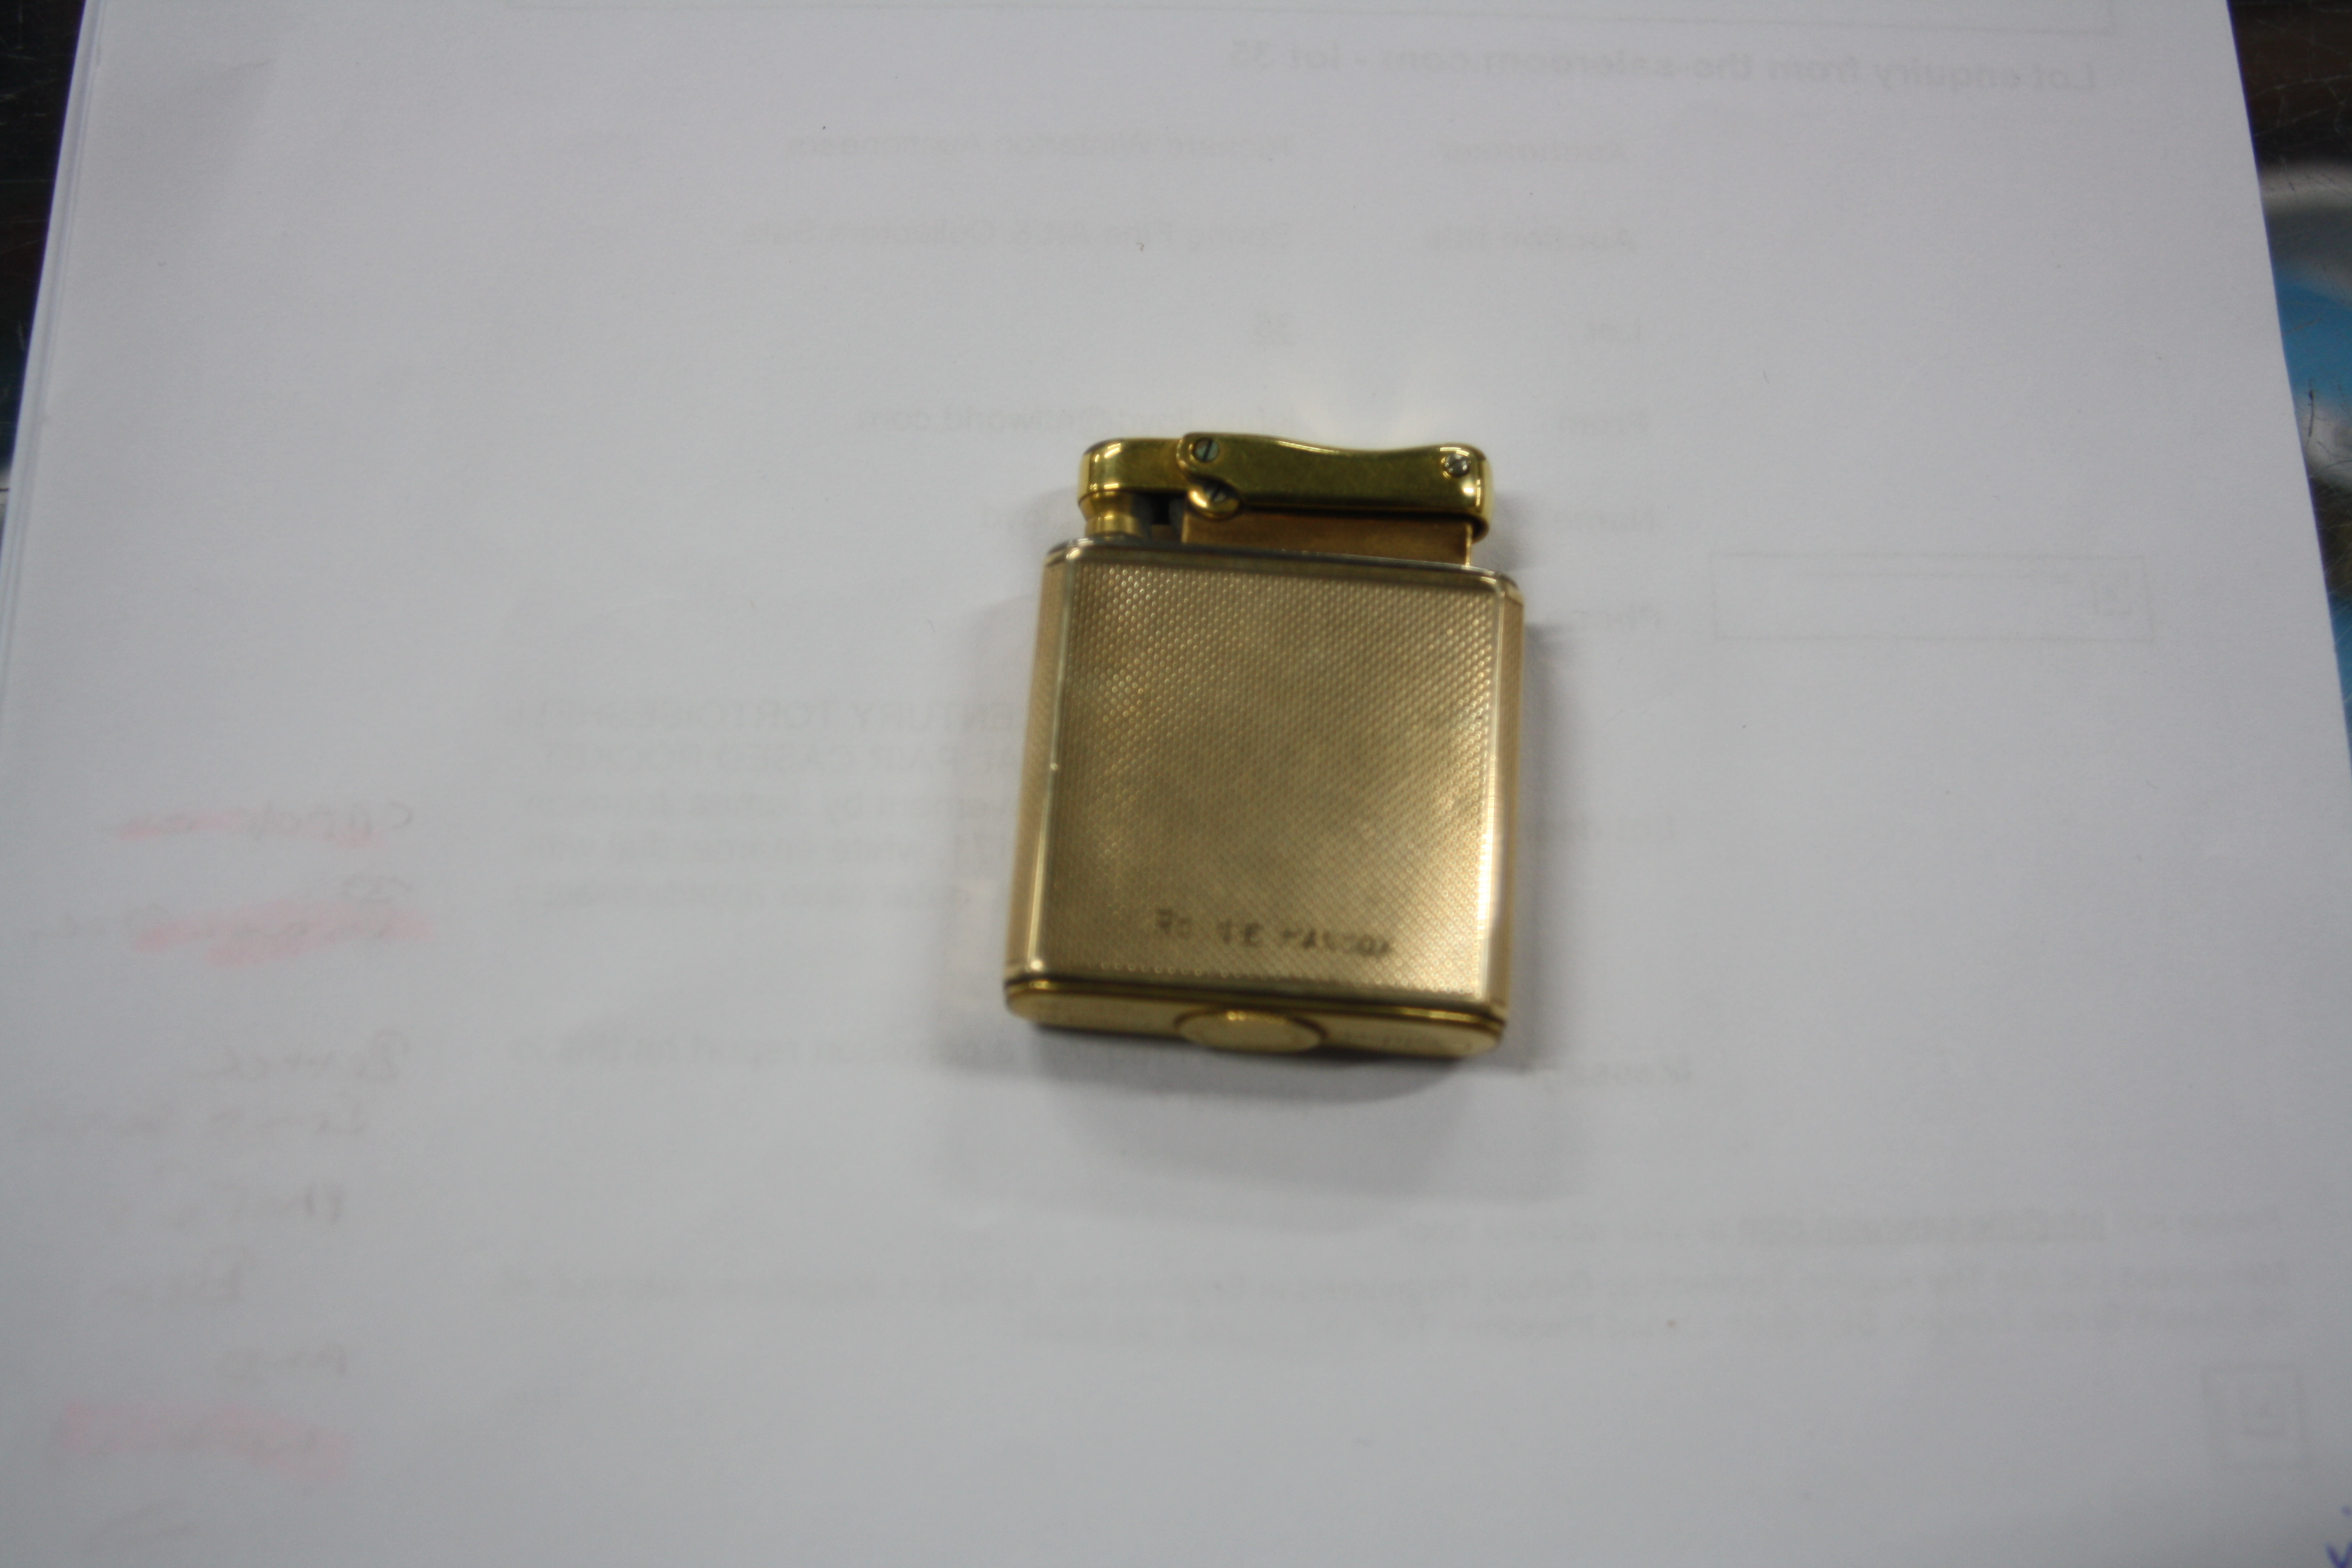 A CALIBRI 9CT GOLD AND GOLD PLATED MONOPOL CIGARETTE LIGHTER, fitted with a square dial clock, - Image 2 of 3